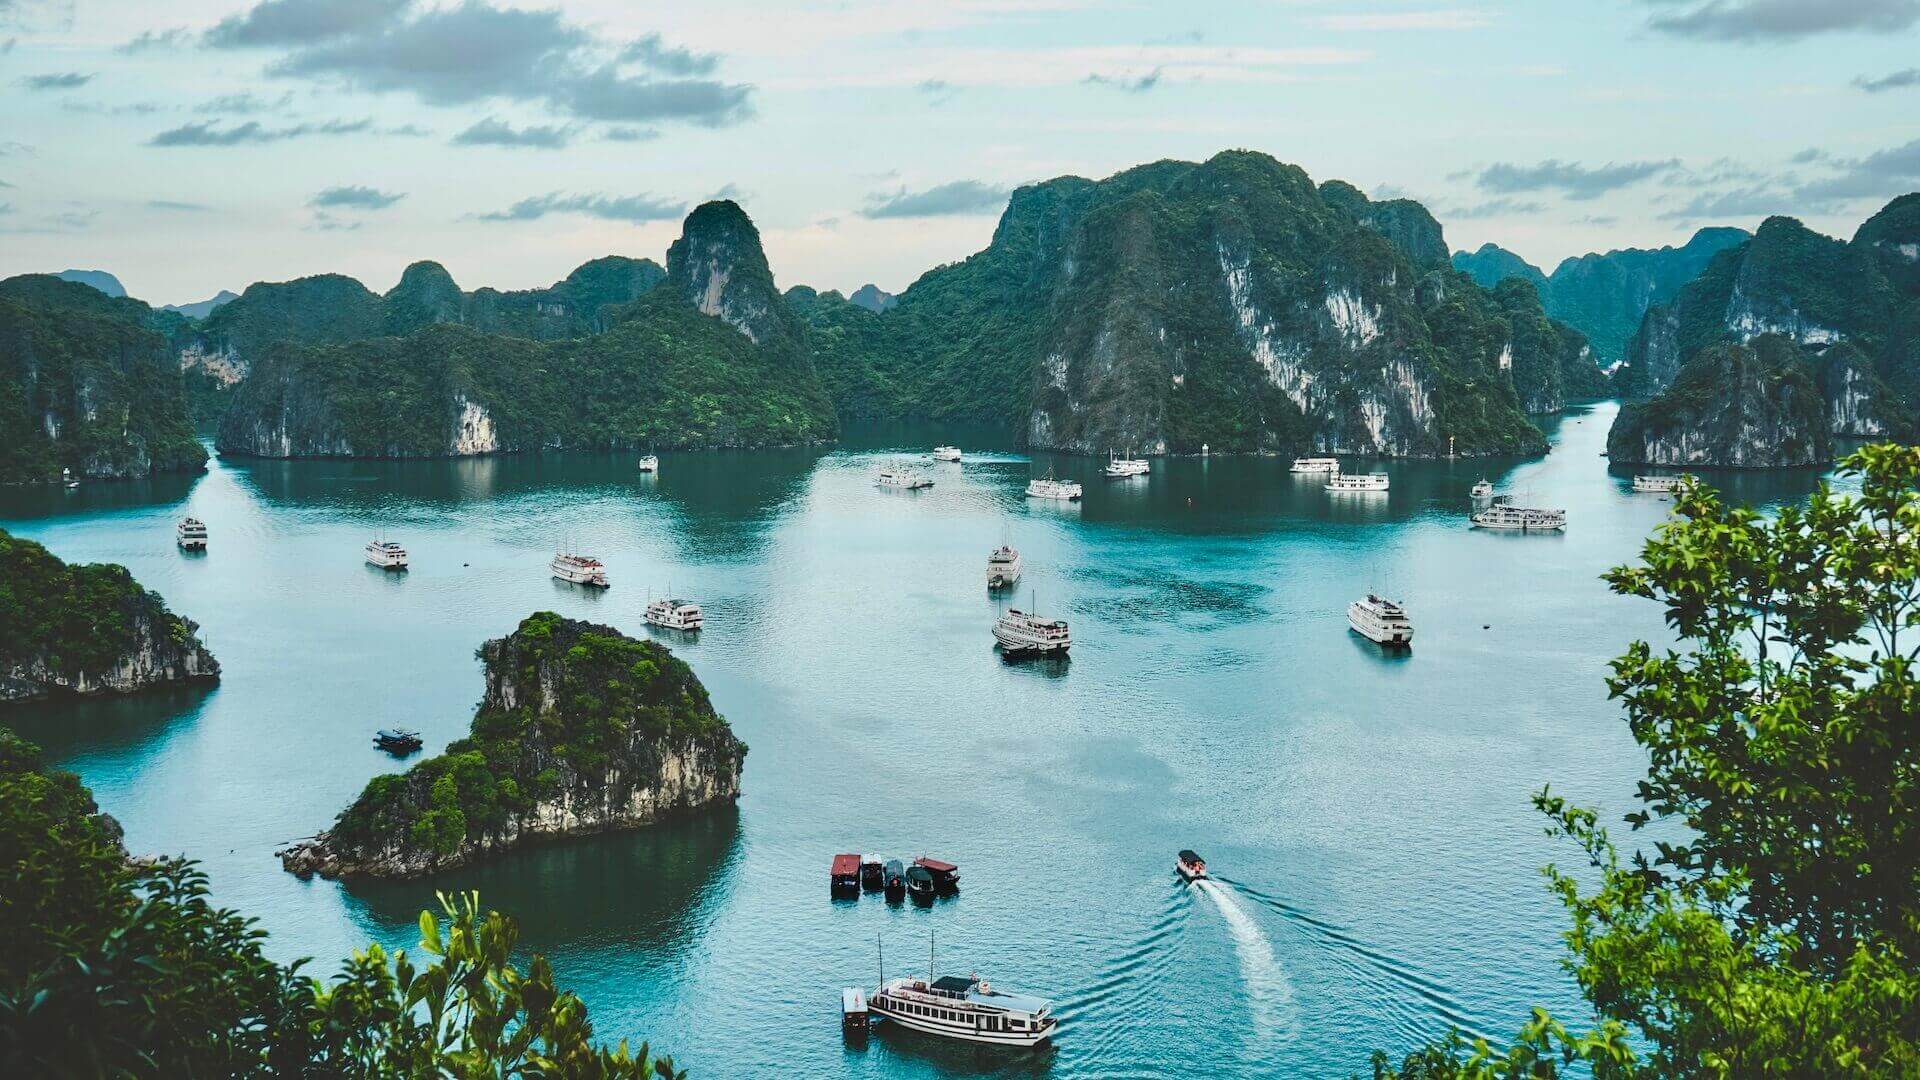 ha long bay vietnam most photogenic place in the world